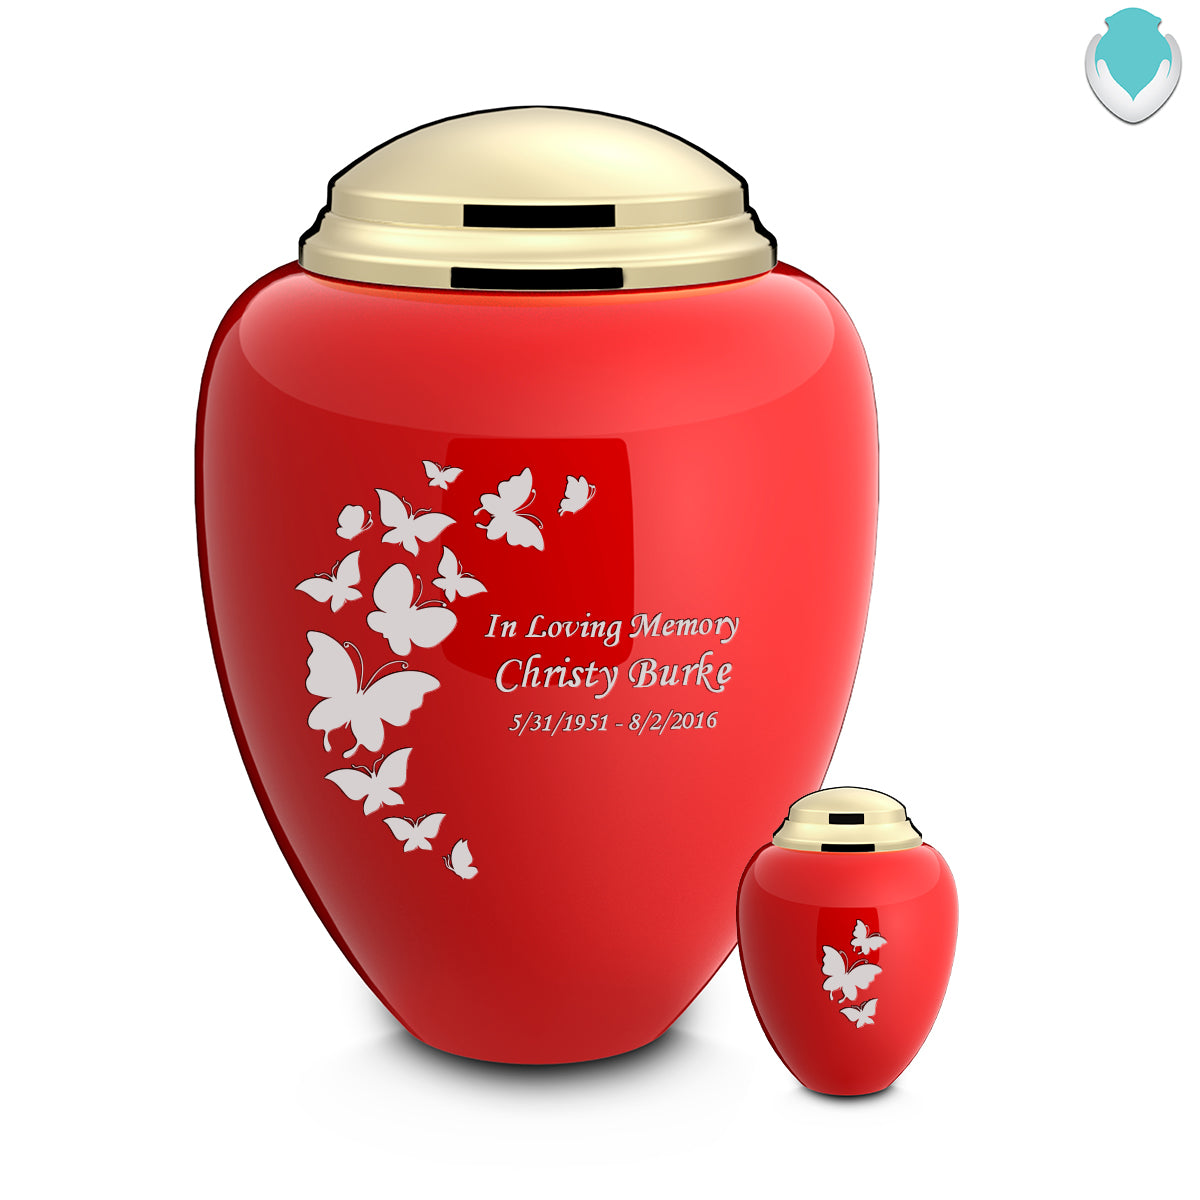 Keepsake Tribute Red and Shiny Brass Butterflies Cremation Urn